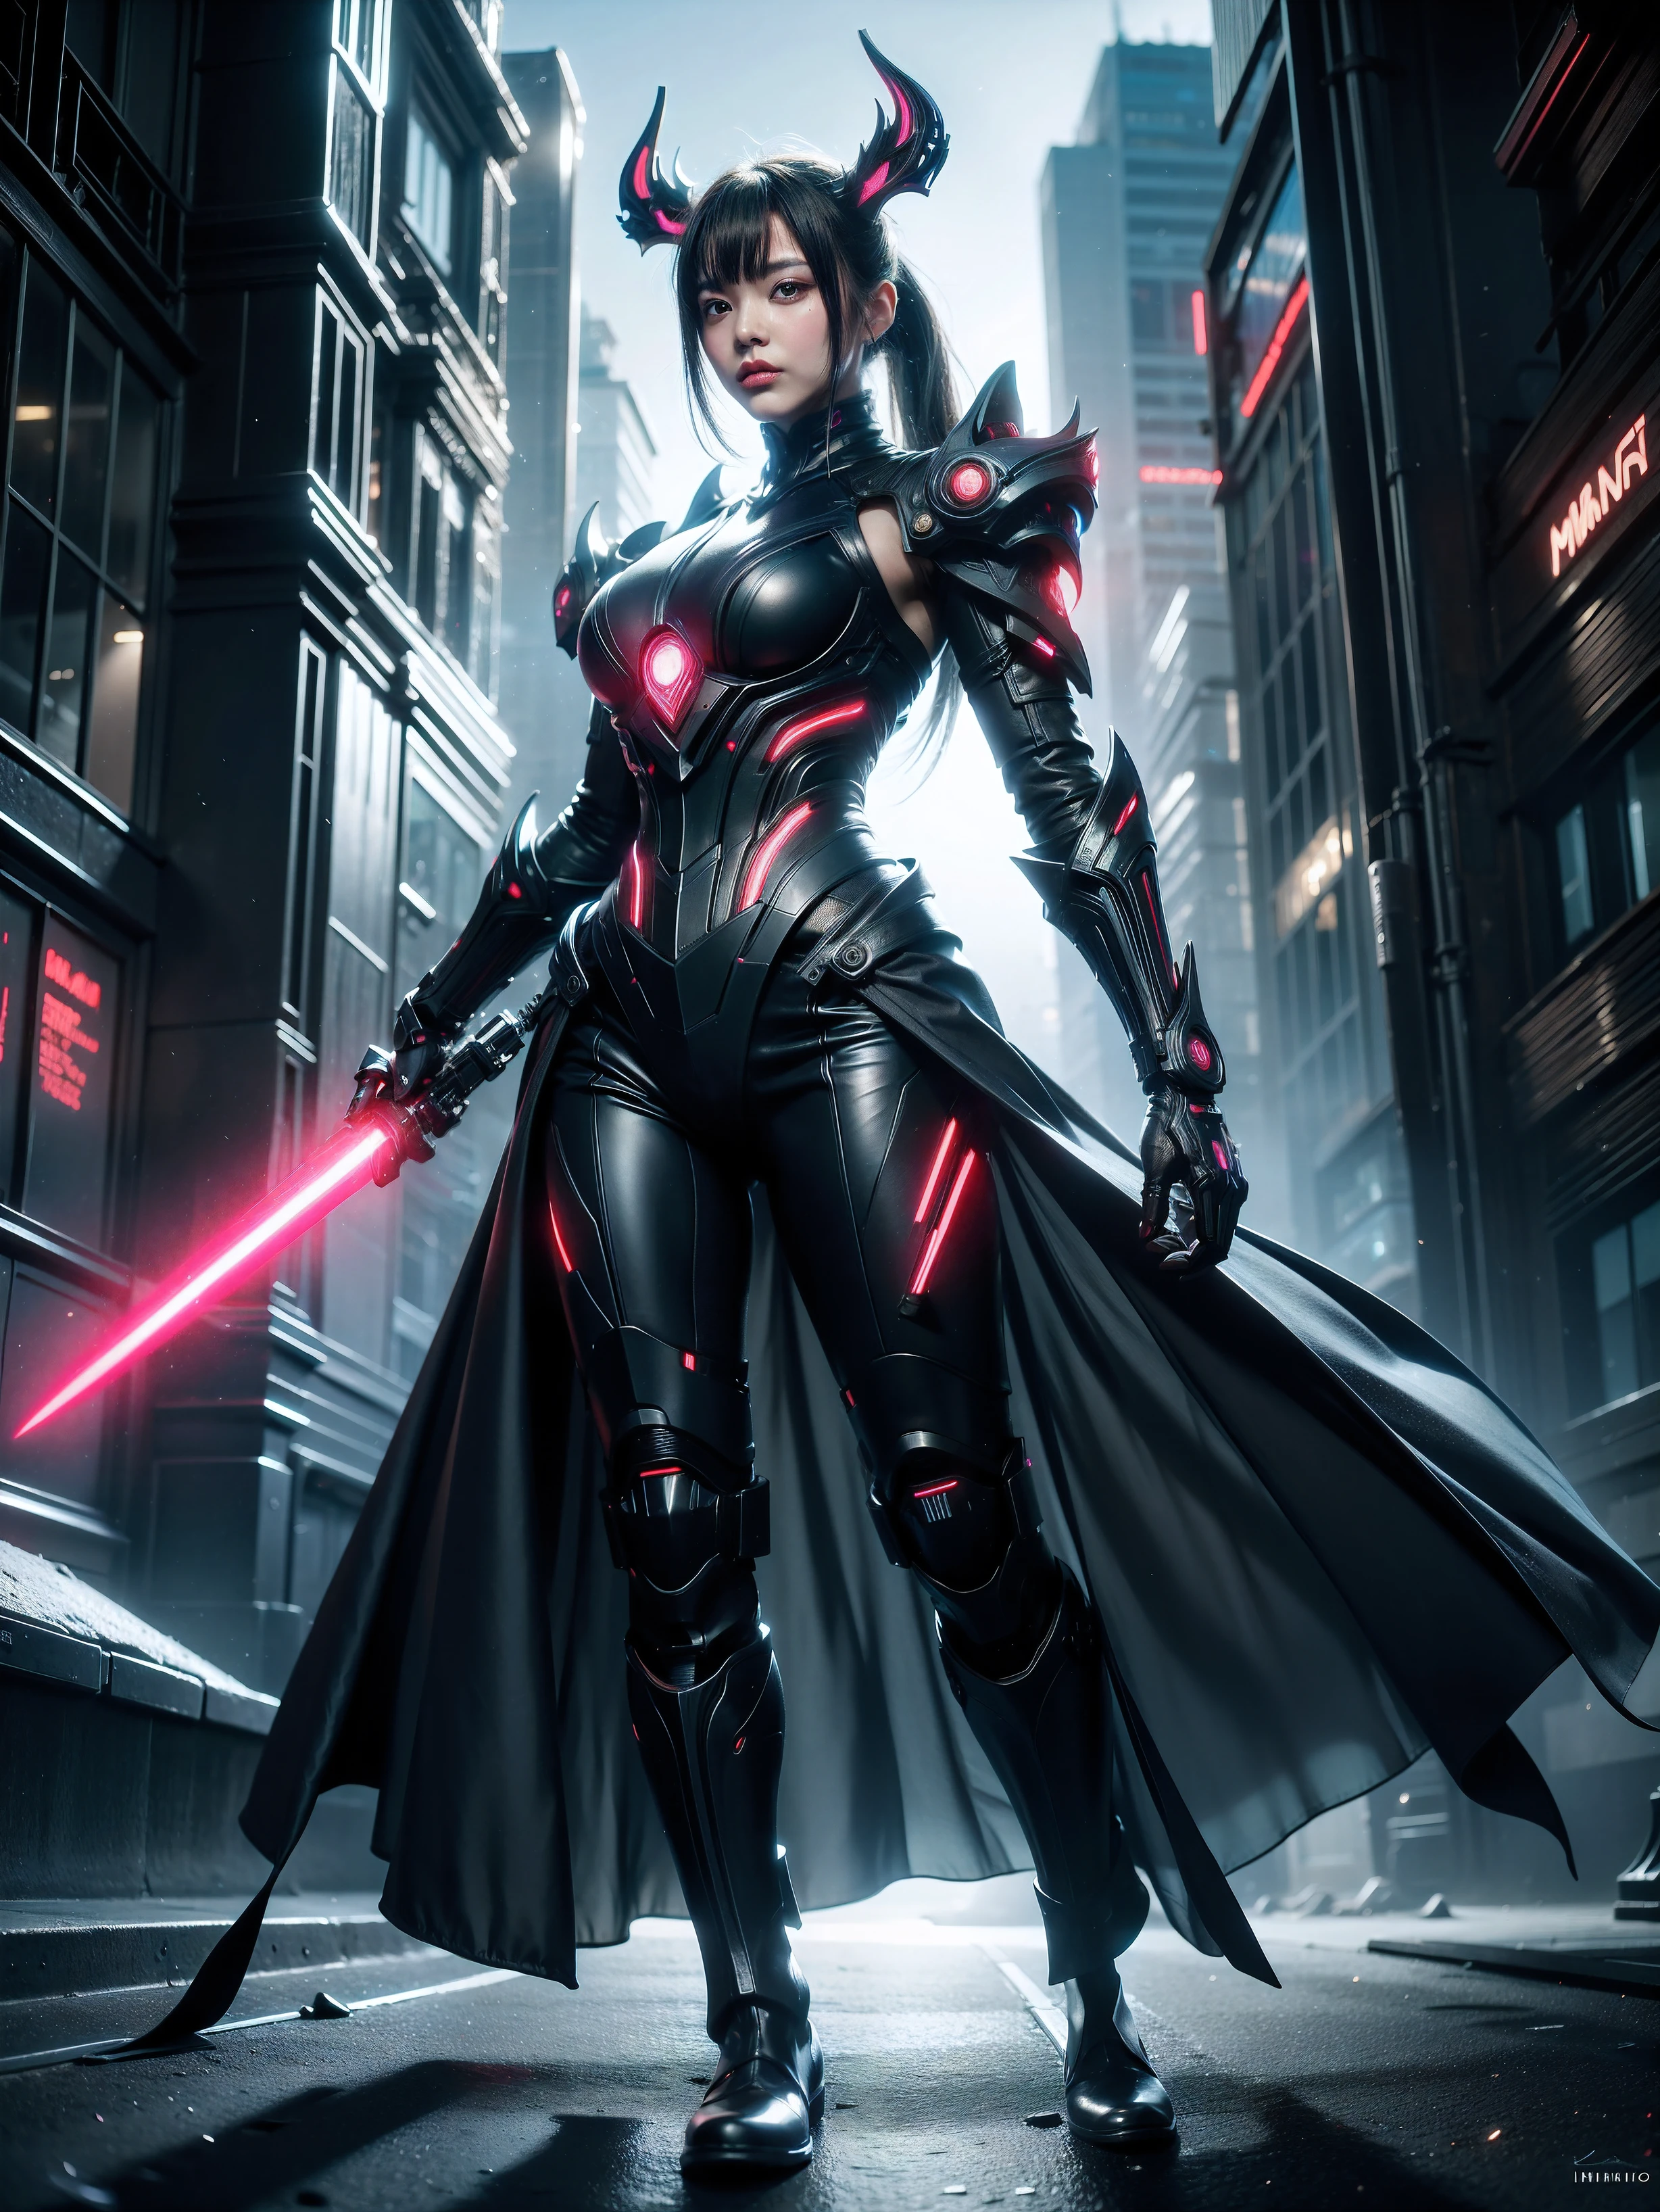 (masterpiece, full-body shot, intrincate raw photography), Imagine a bustling cyberpunk city at night, with neon lights reflecting off wet pavement. In the foreground, a beautiful female android stands tall and elegant, her metallic skin shimmering in the artificial light. She has sleek, angular features and piercing eyes that seem to glow with an otherworldly energy. She hold a red glowing lightsaber. In the middle ground, futuristic skyscrapers loom overhead, their surfaces adorned with holographic advertisements and blinking lights. In the background, flying cars zip through the night sky, leaving trails of light in their wake.


The scene is bathed in a cool blue light, creating a moody and mysterious atmosphere. The composition focuses on the android, her graceful pose exuding confidence and power. The camera angle is slightly low, emphasizing her height and presence in the urban landscape. Bokeh effects create a sense of depth, with the city lights blurred in the background.


The color palette is a mix of deep blues, neon pinks, and metallic silvers, enhancing the futuristic and high-tech feel of the scene. The overall mood is one of intrigue and fascination, inviting the viewer to ponder the nature of humanity and technology in this cybernetic world.


Style: Futuristic cyberpunk, realistic
Composition: Foreground android, middle ground skyscrapers, background flying cars
Lighting: Cool blue light, neon reflections
Techniques: Bokeh effects, low angle perspective
Colors: Deep blues, neon pinks, metallic silvers
Emotions: Intrigue, fascination